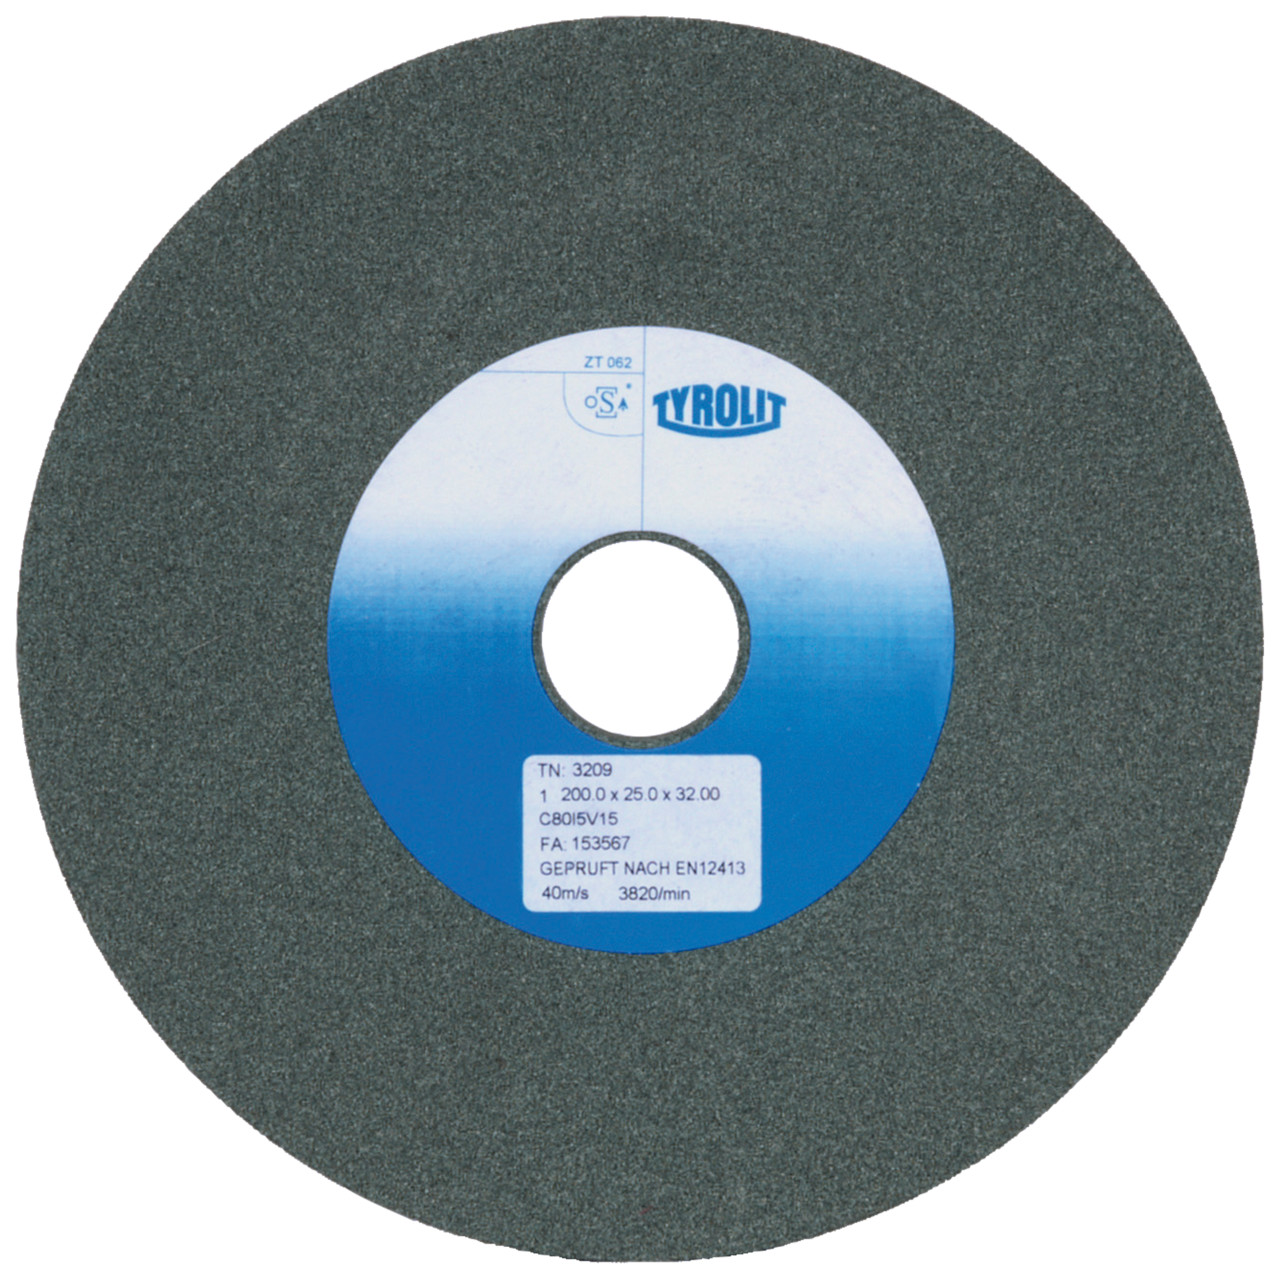 Tyrolit Conventional ceramic grinding discs DxDxH 250x25x76 For carbide and cast iron, shape: 1, Art. 49680